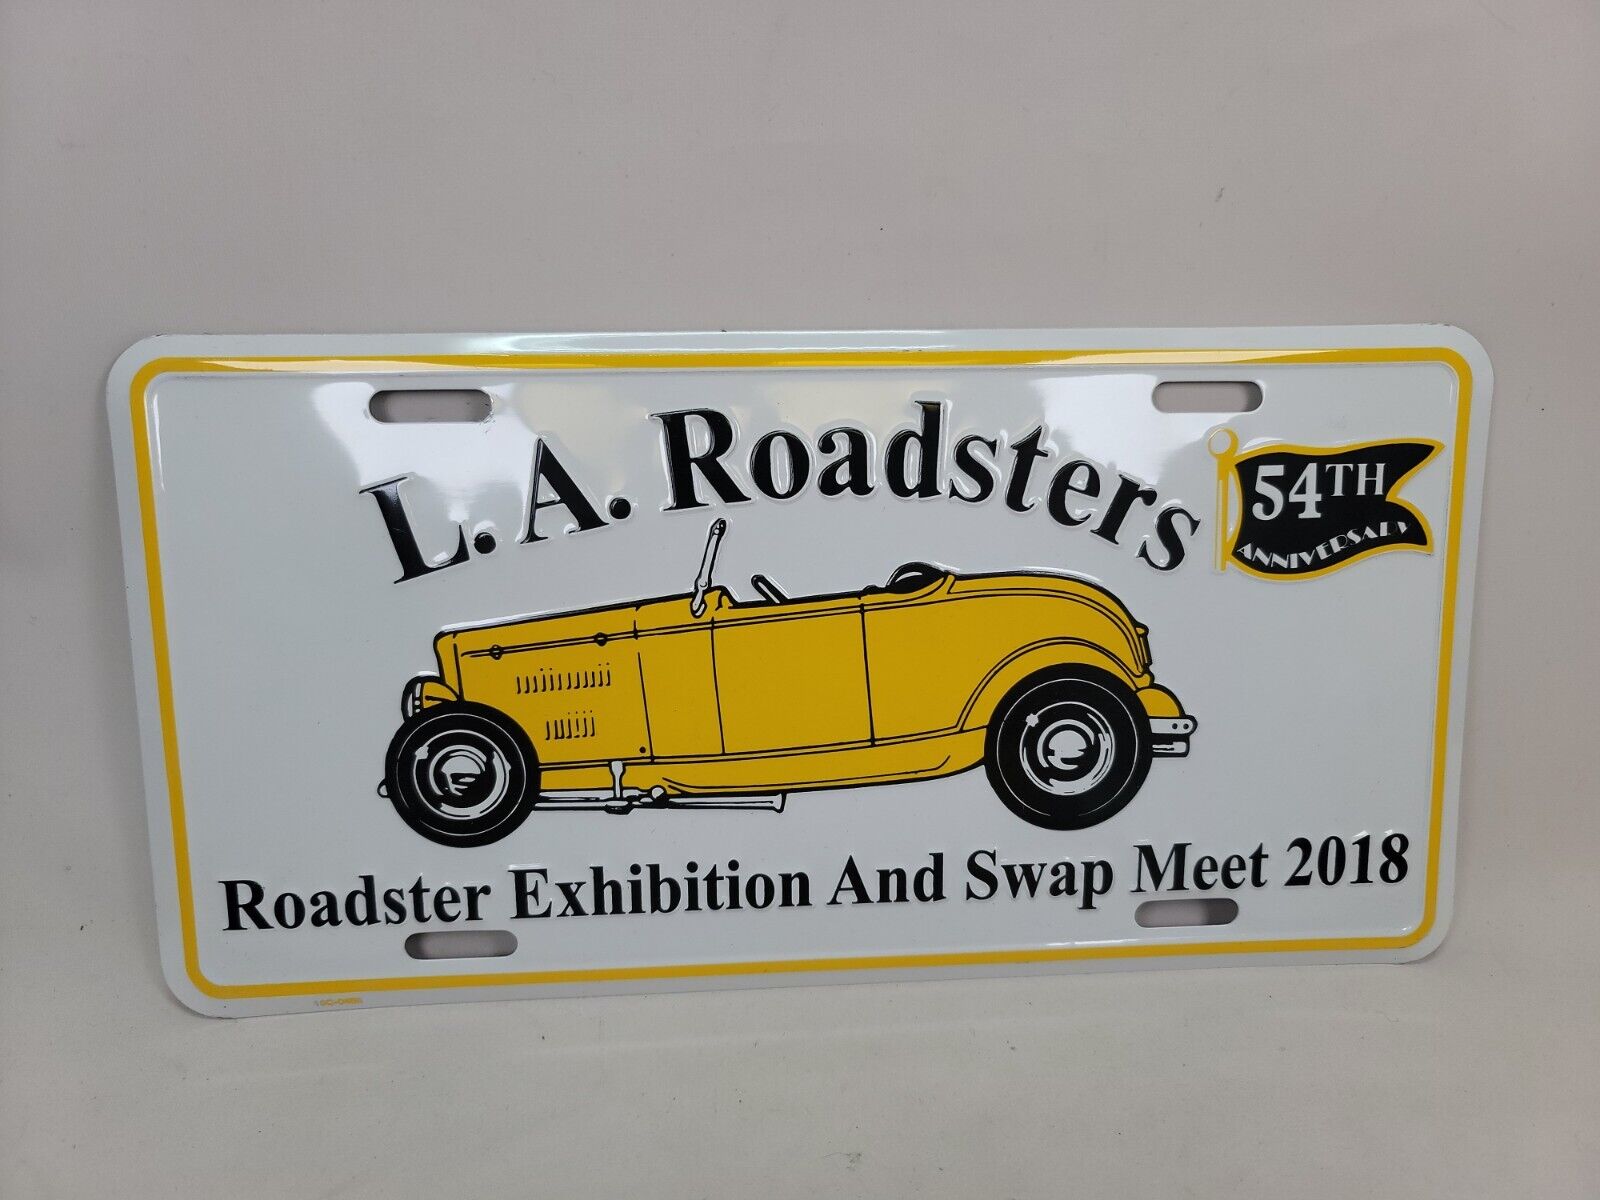 L.A. Roadsters 54th annual Roadster Exhibition  Swap Meet 2018 License Plate 